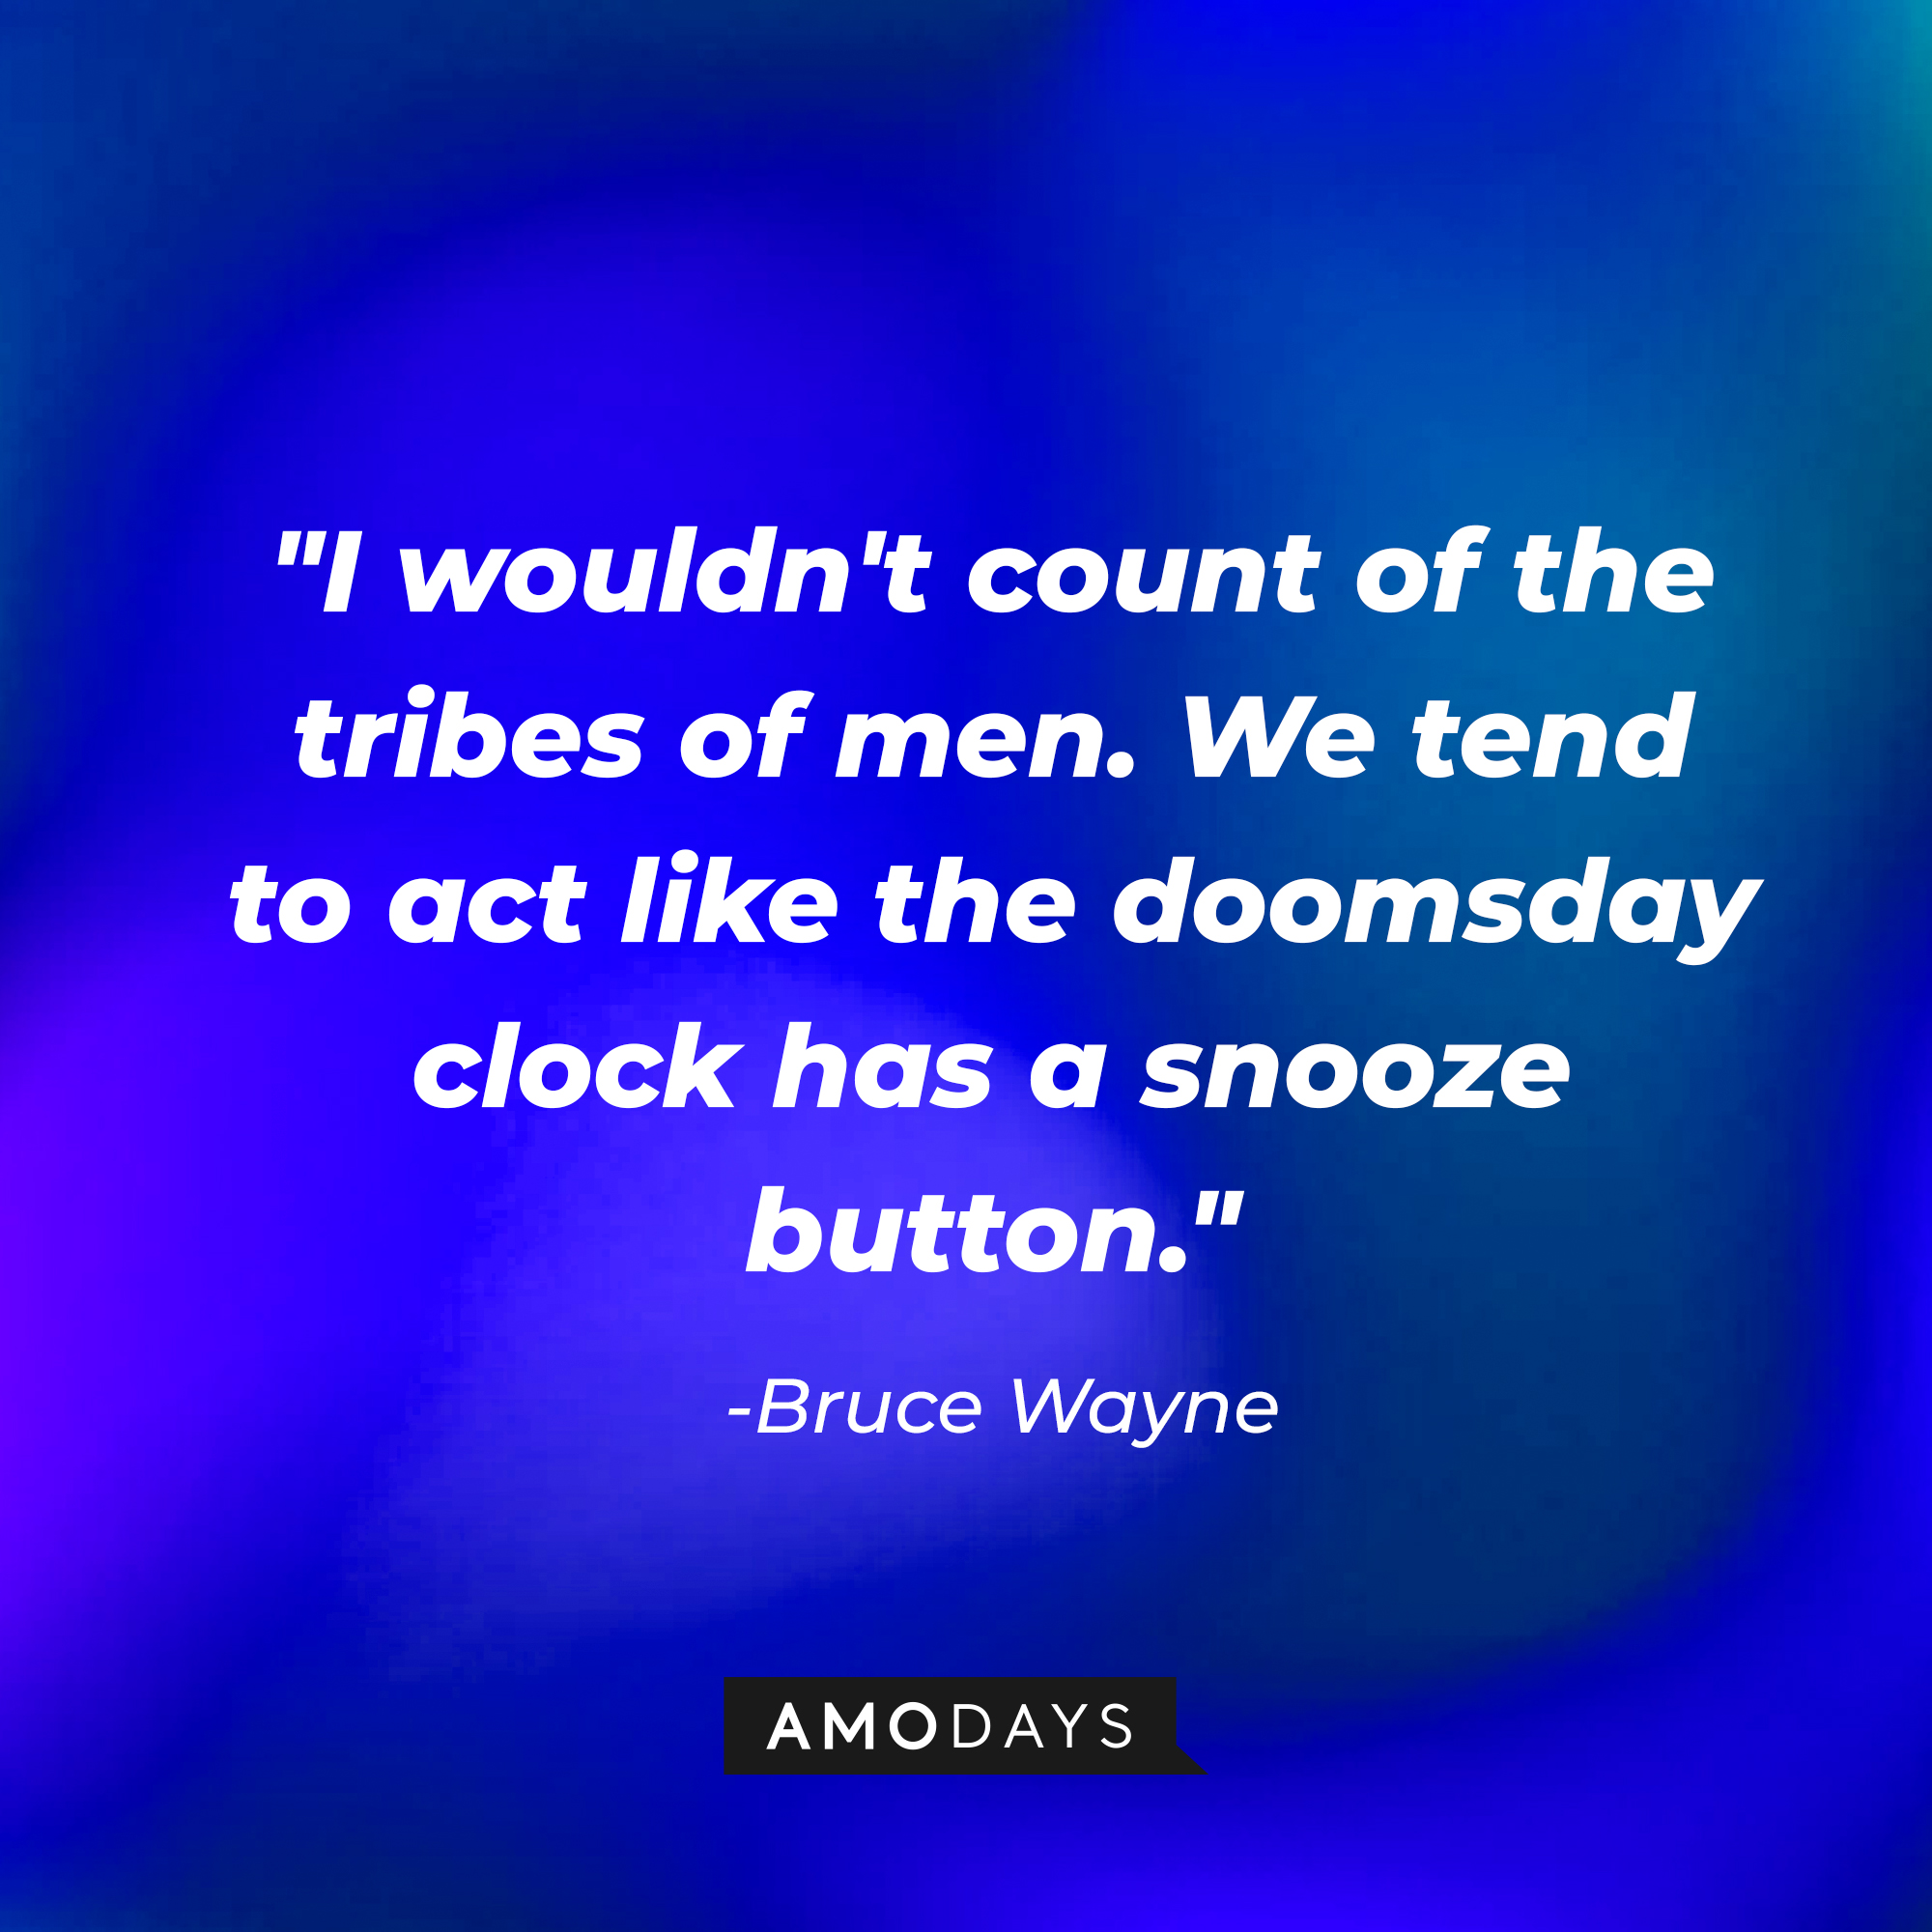 Bruce Wayne's quote, "I wouldn't count of the tribes of men. We tend to act like the doomsday clock has a snooze button." | Source: AmoDays